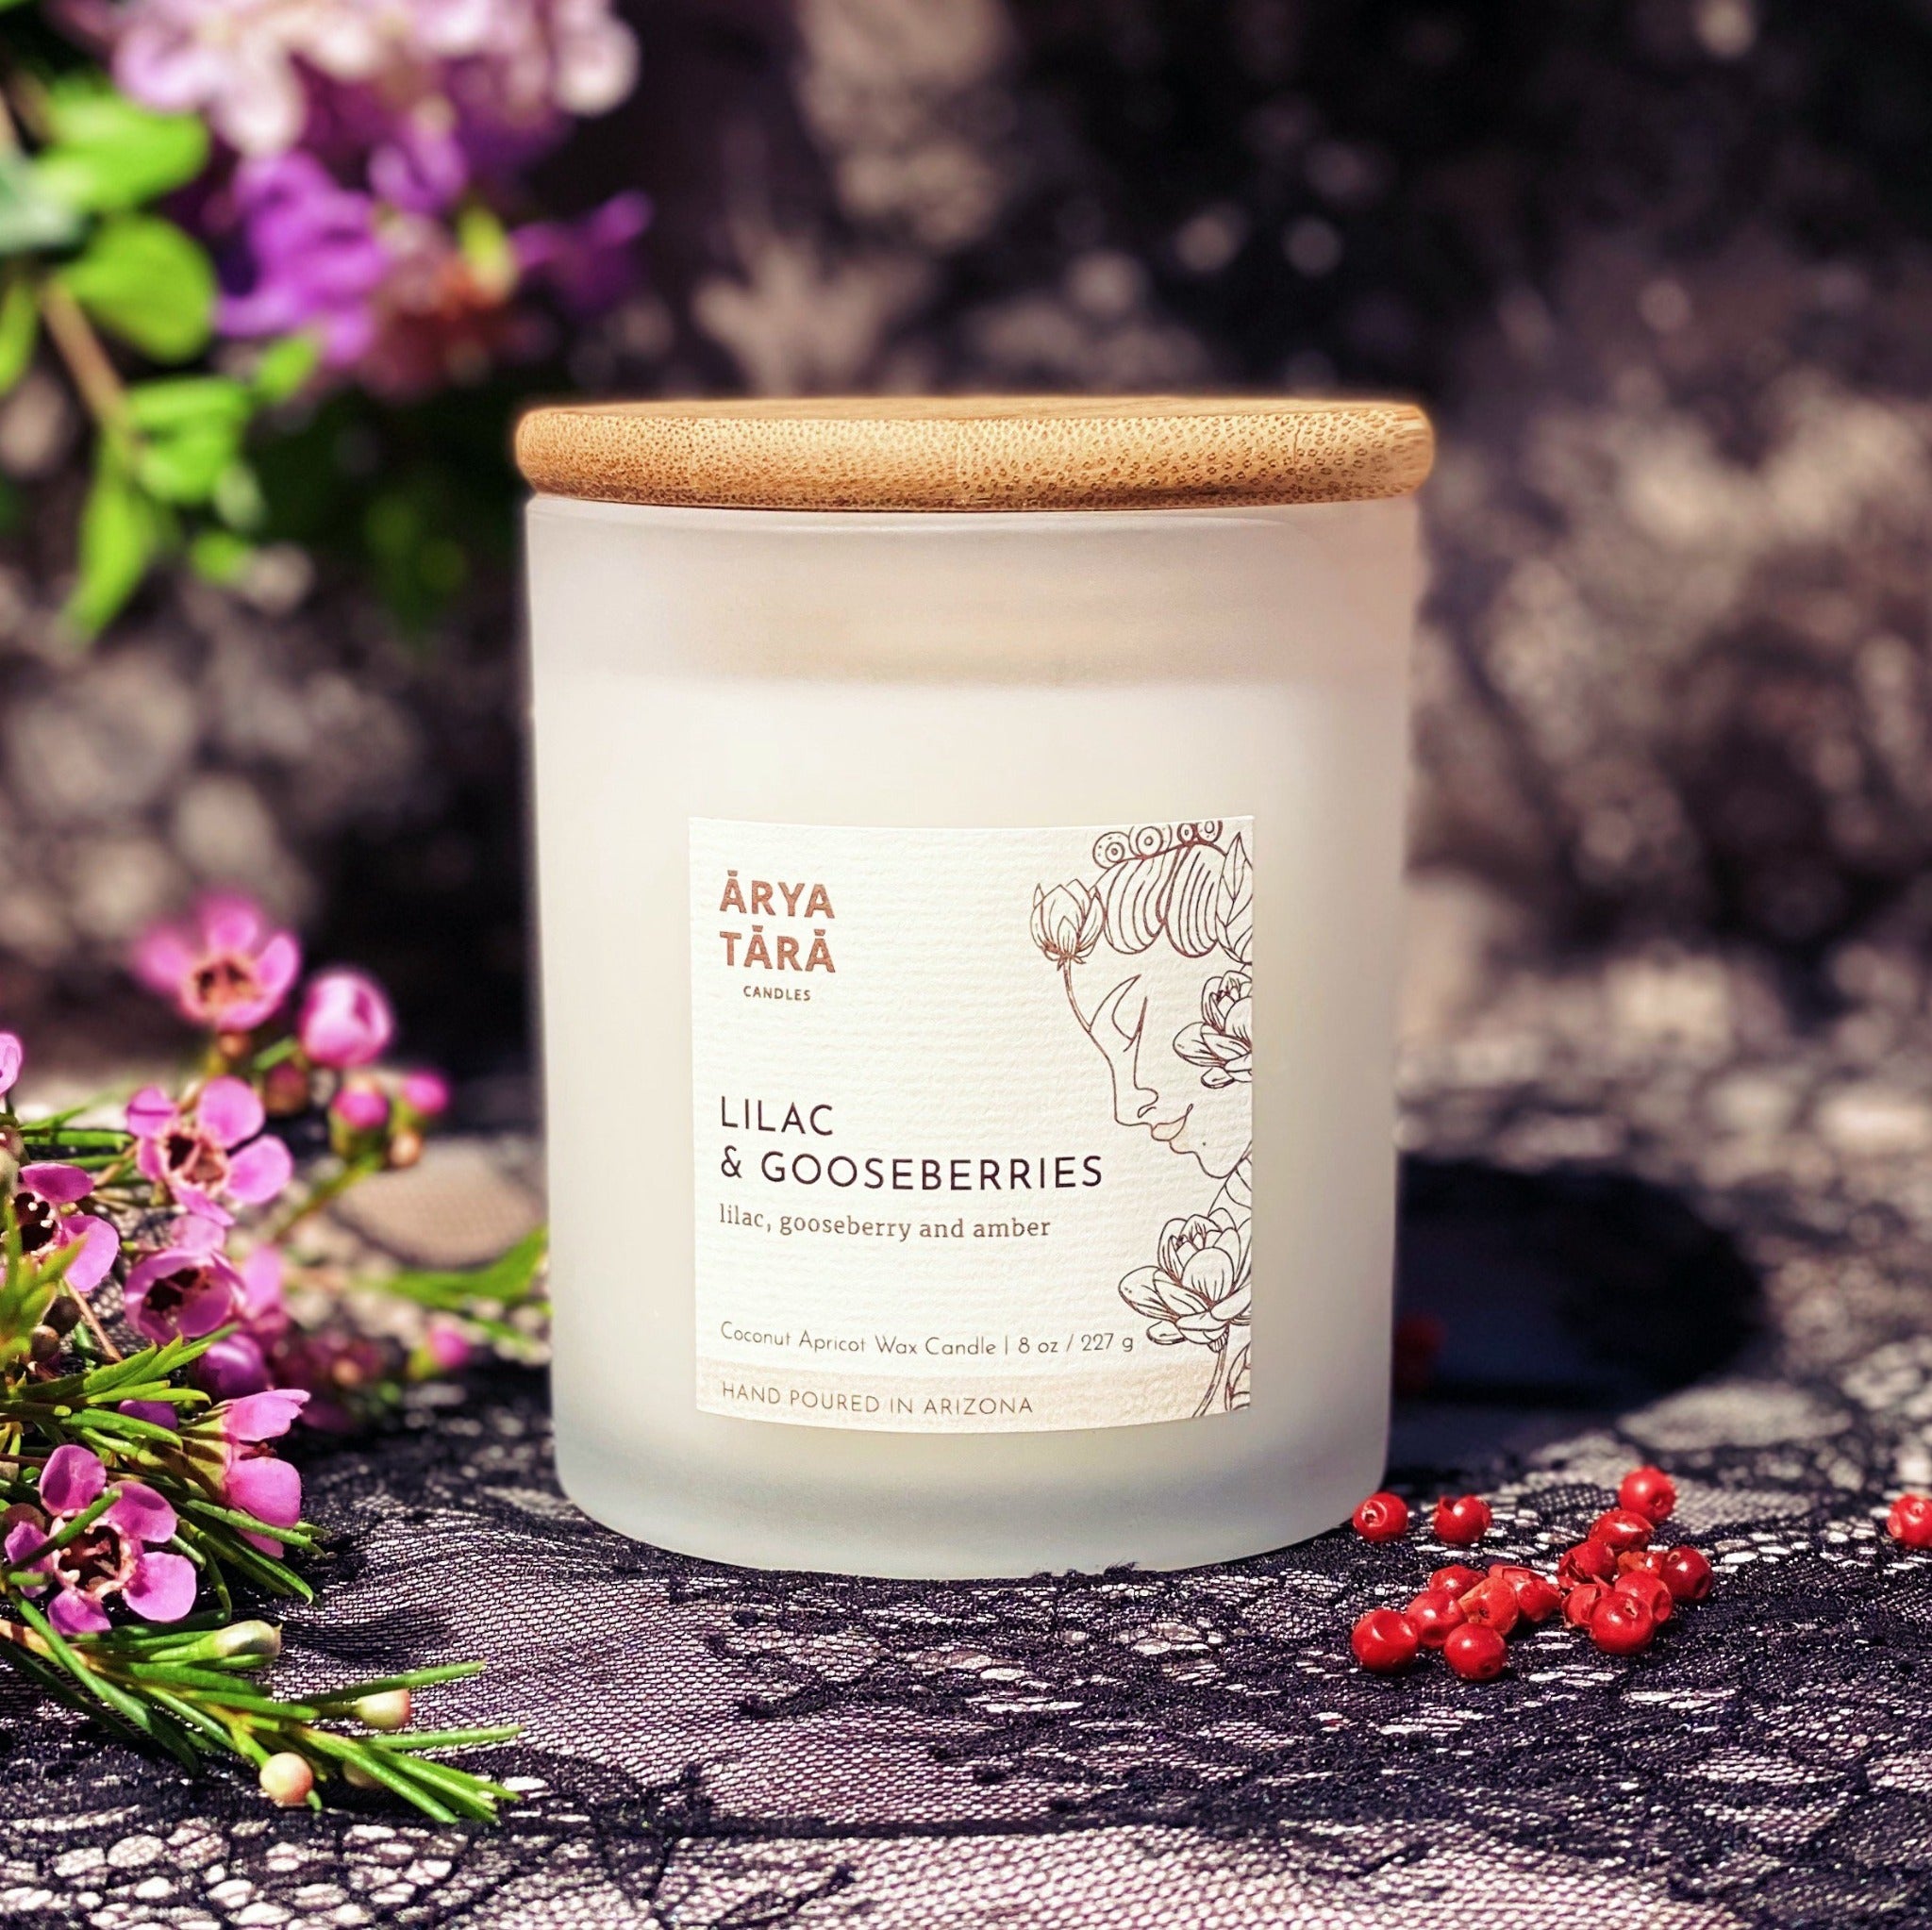 Lilac and Gooseberries Candle by Arya Tara Candles. Lilac, gooseberries, pink peppercorn, vanilla, patchouli, amber. Witcher fandom candle, Yennefer perfume, Yennefer scent, Witcher themed candle, Witcher scents. Non-toxic natural candle made with coconut apricot wax, lead-free zinc-free wicks, premium fragrances. Luxury candle, natural candle. Made in Tucson Arizona, hand poured candle in small batch. Glass white jar with bamboo wooden lid. 